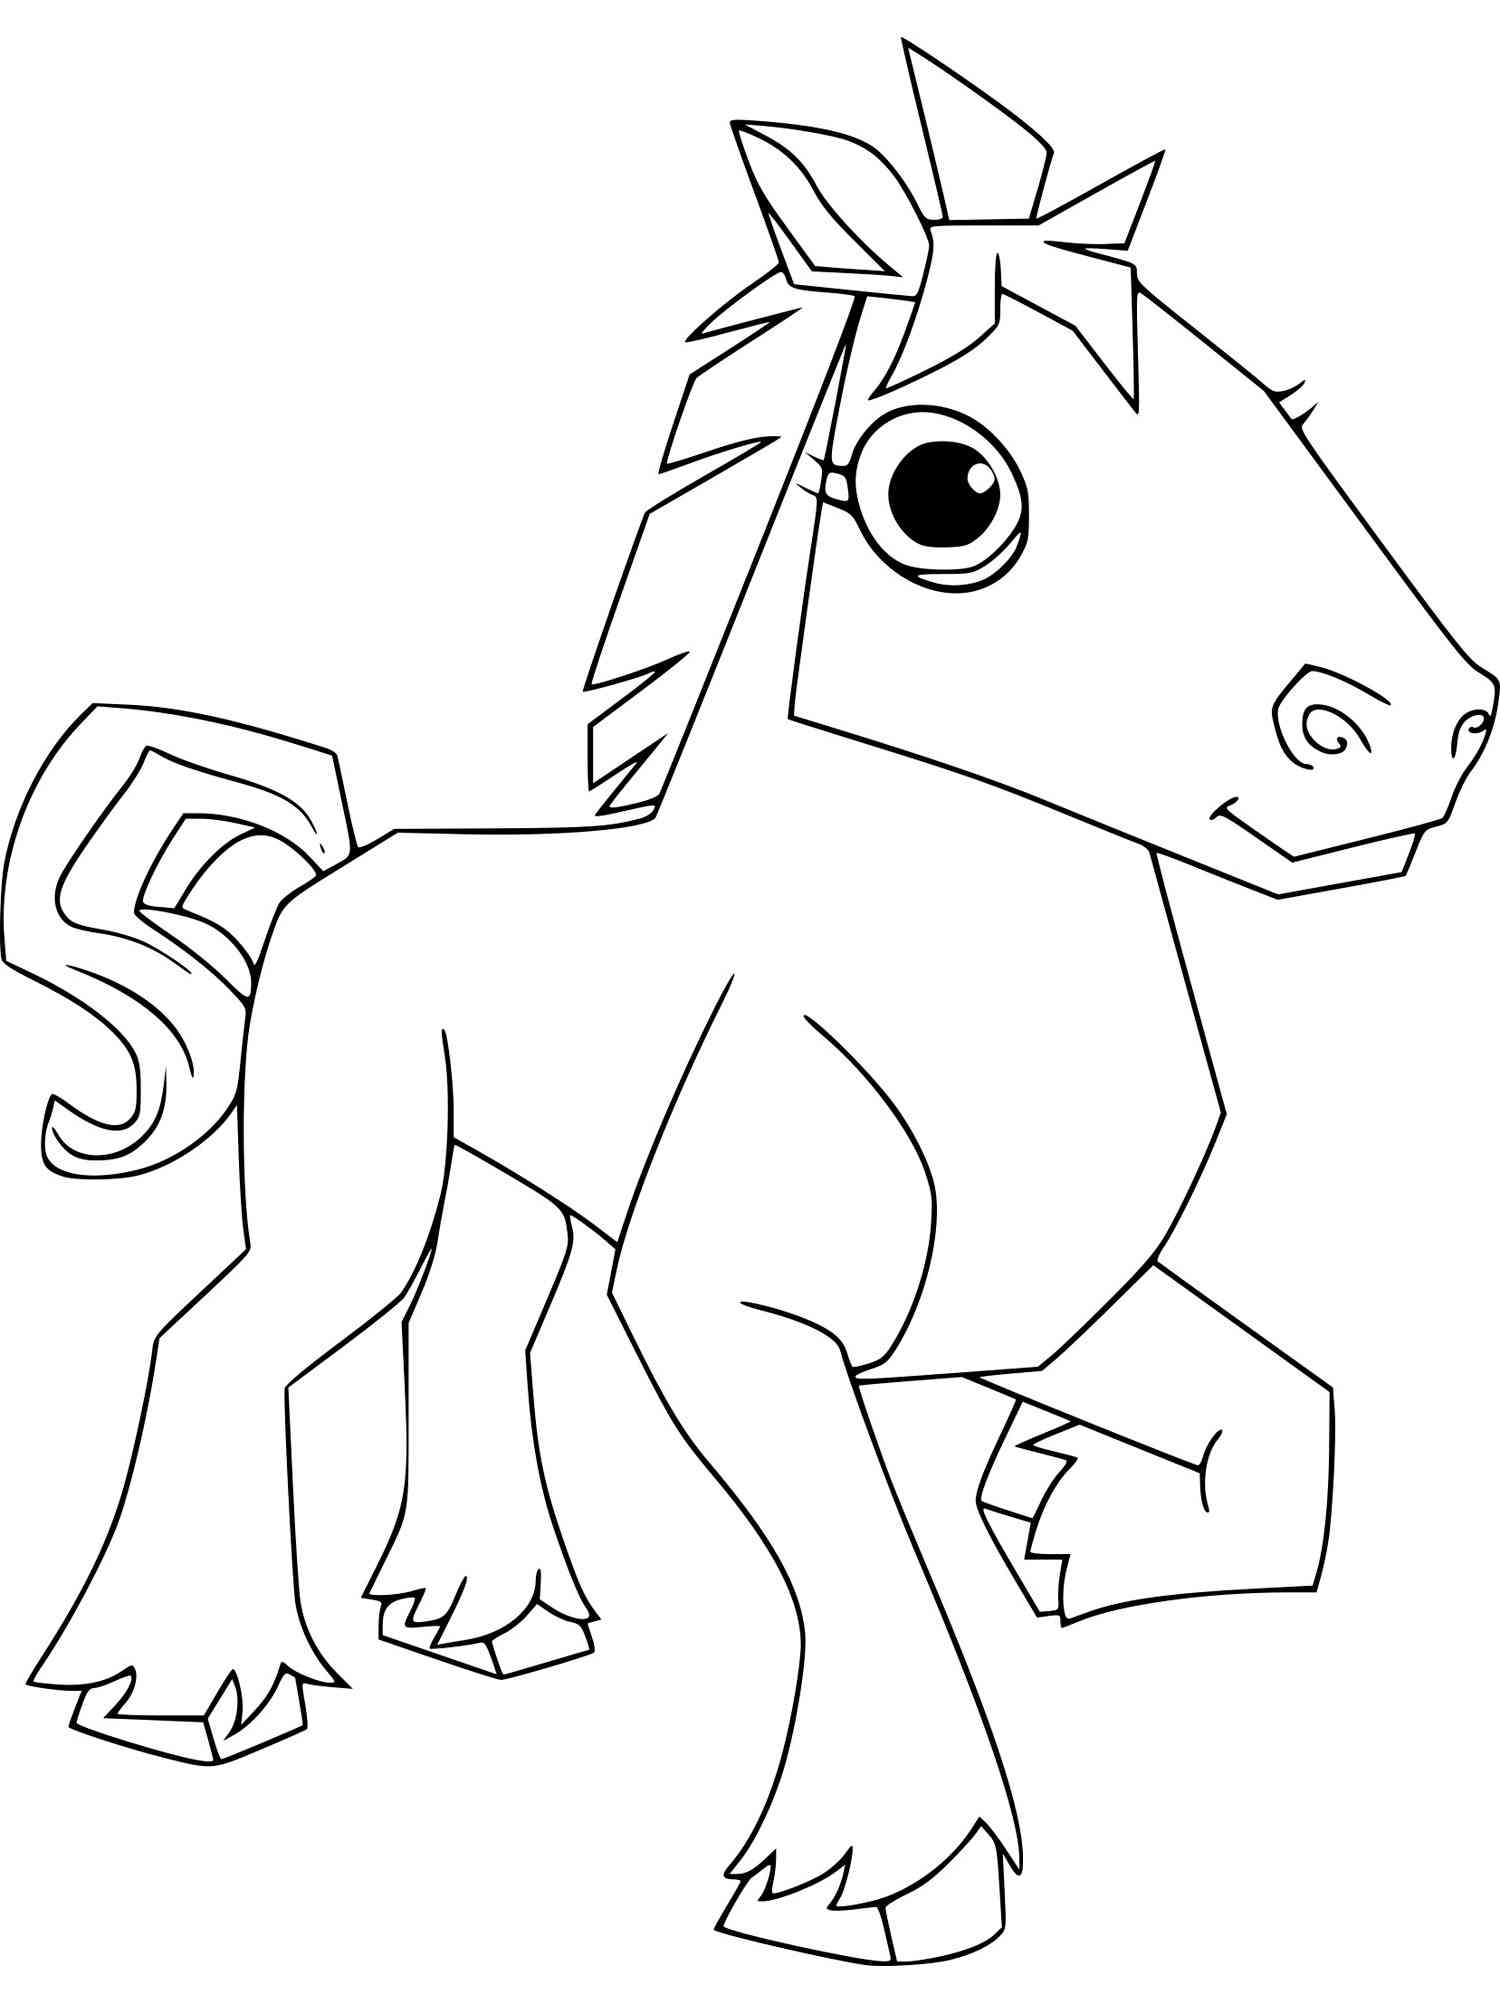 Horse Animal Jam coloring page